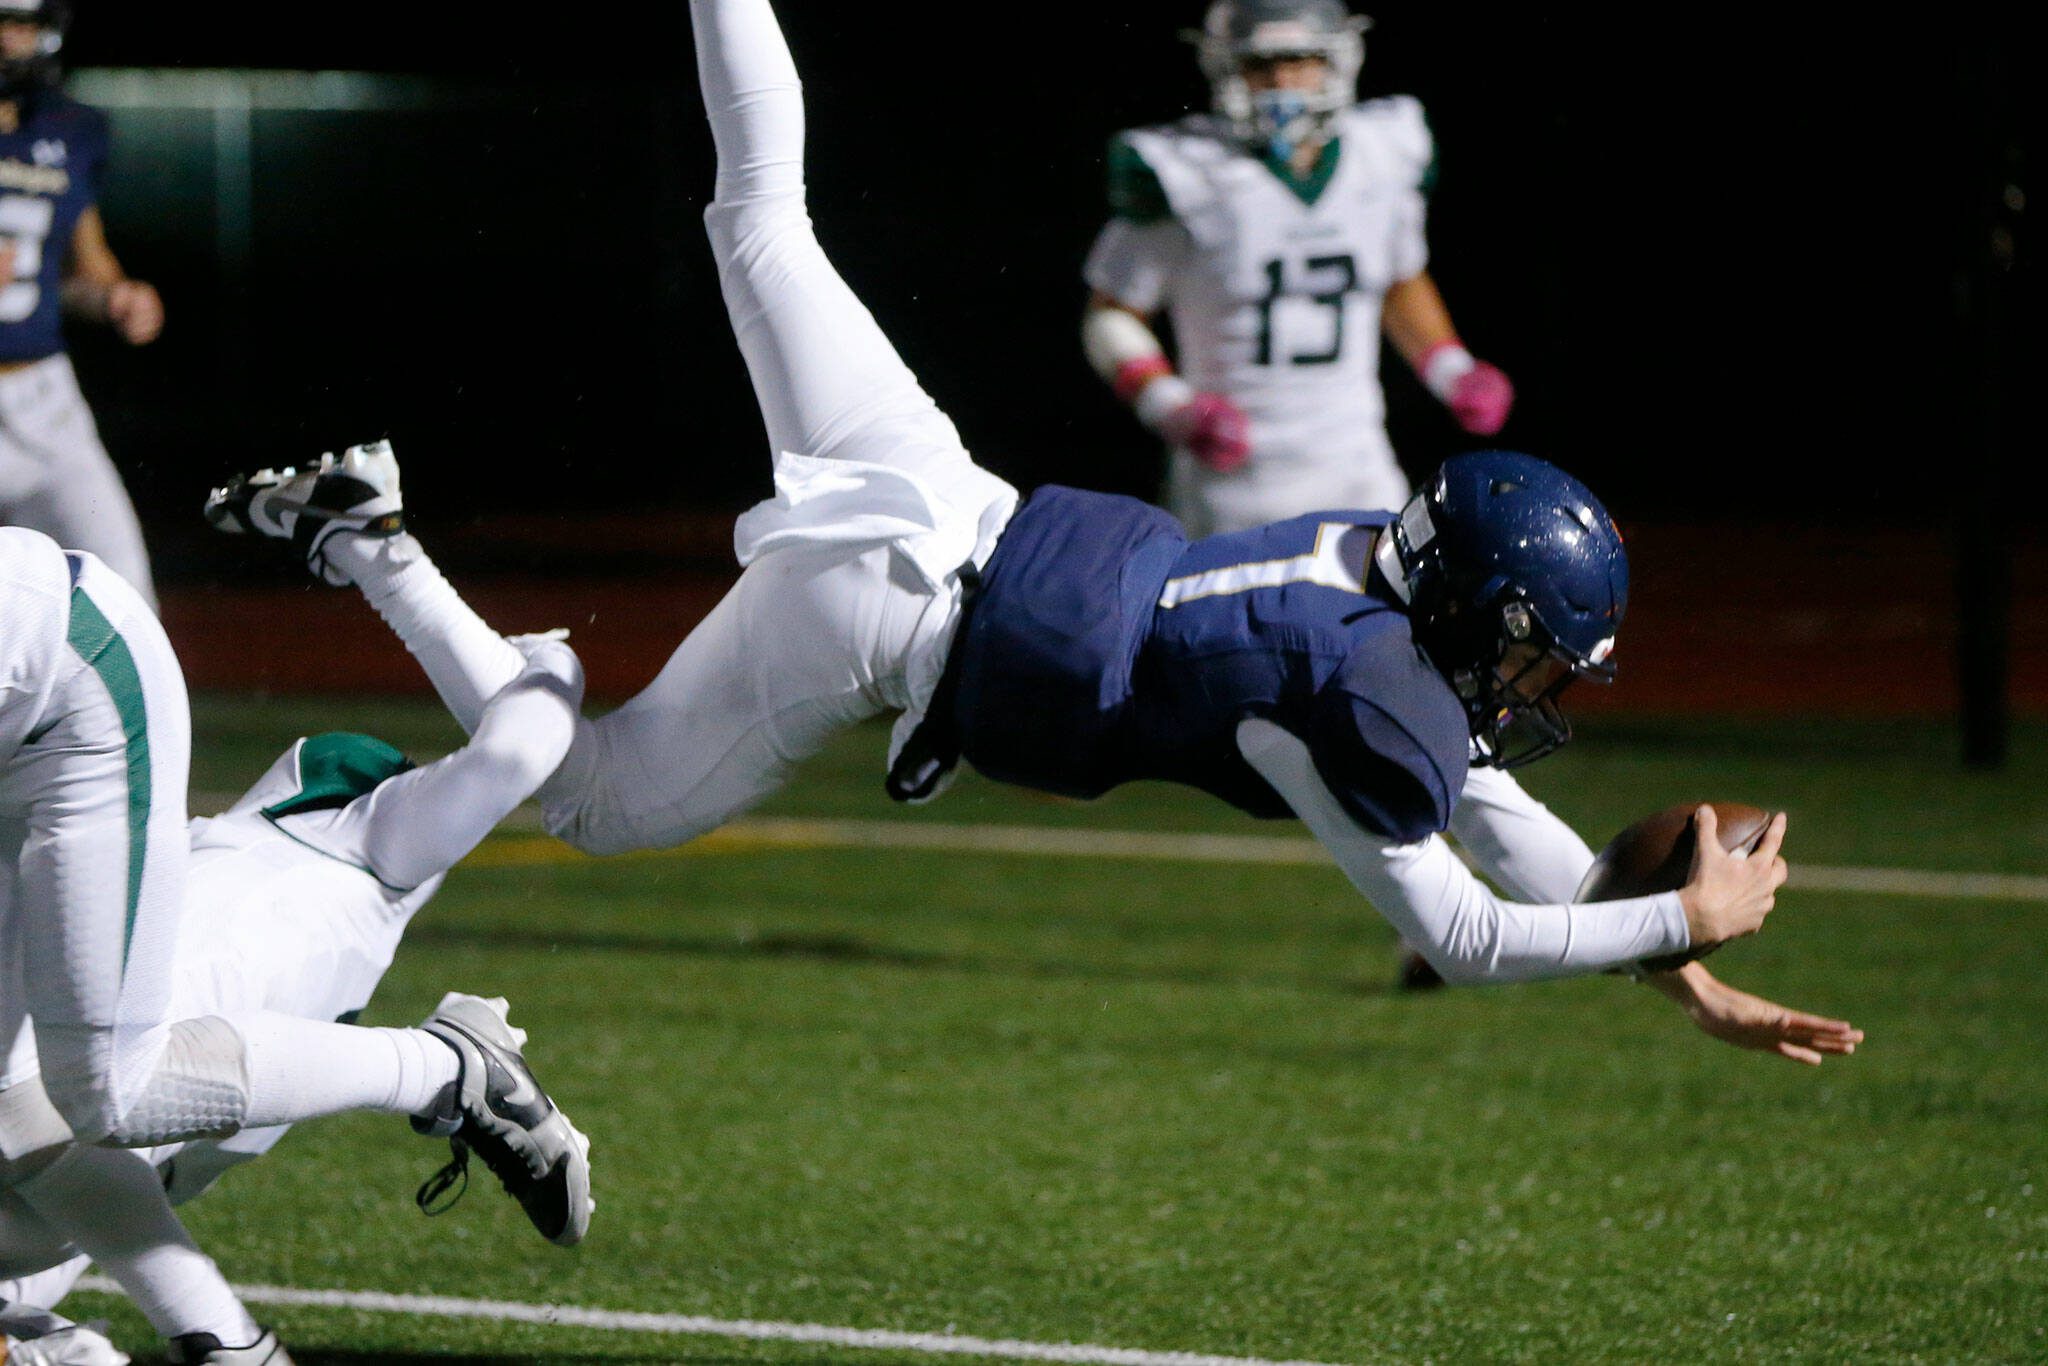 Arlington’s Leyton Martin leaps over two defenders for a rushing touchdown against Ridgeline during a playoff matchup Friday at Arlington High School in Arlington. (Ryan Berry / The Herald)